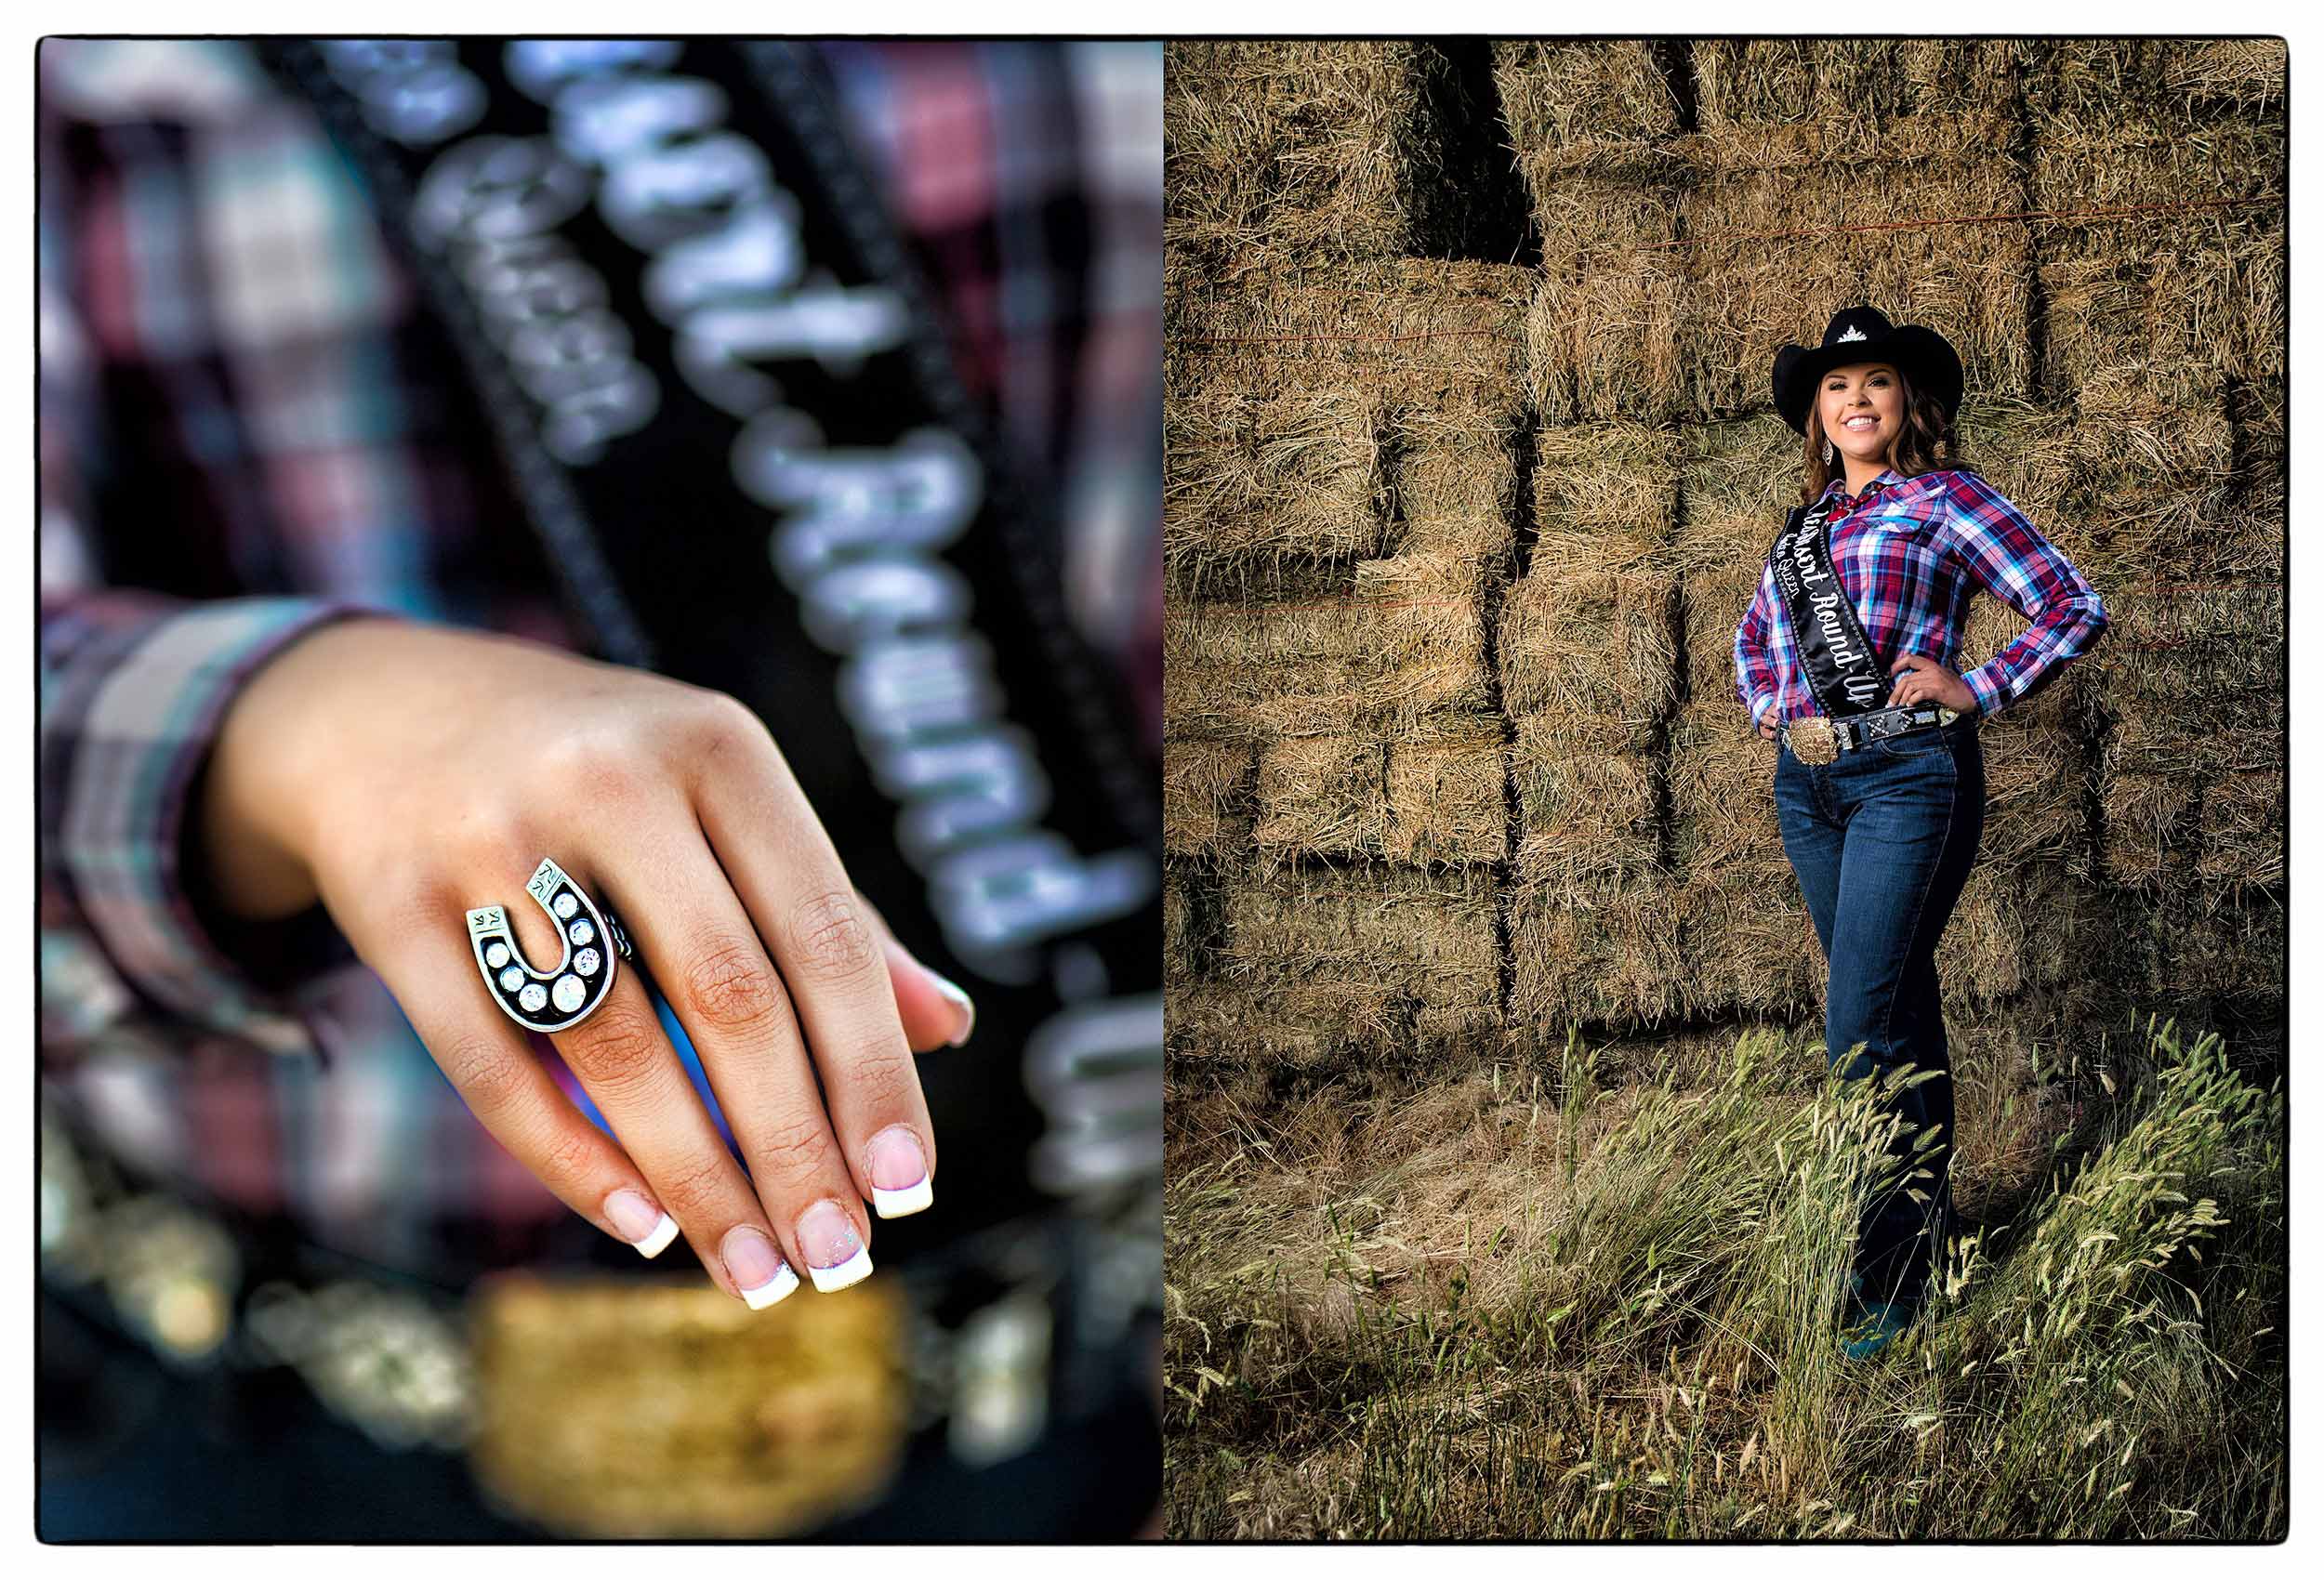 a-cody-wyoming-rodeo-queen-poses-for-a-portrait-at-the-annual-cody-summer-rodeo-in-wyoming